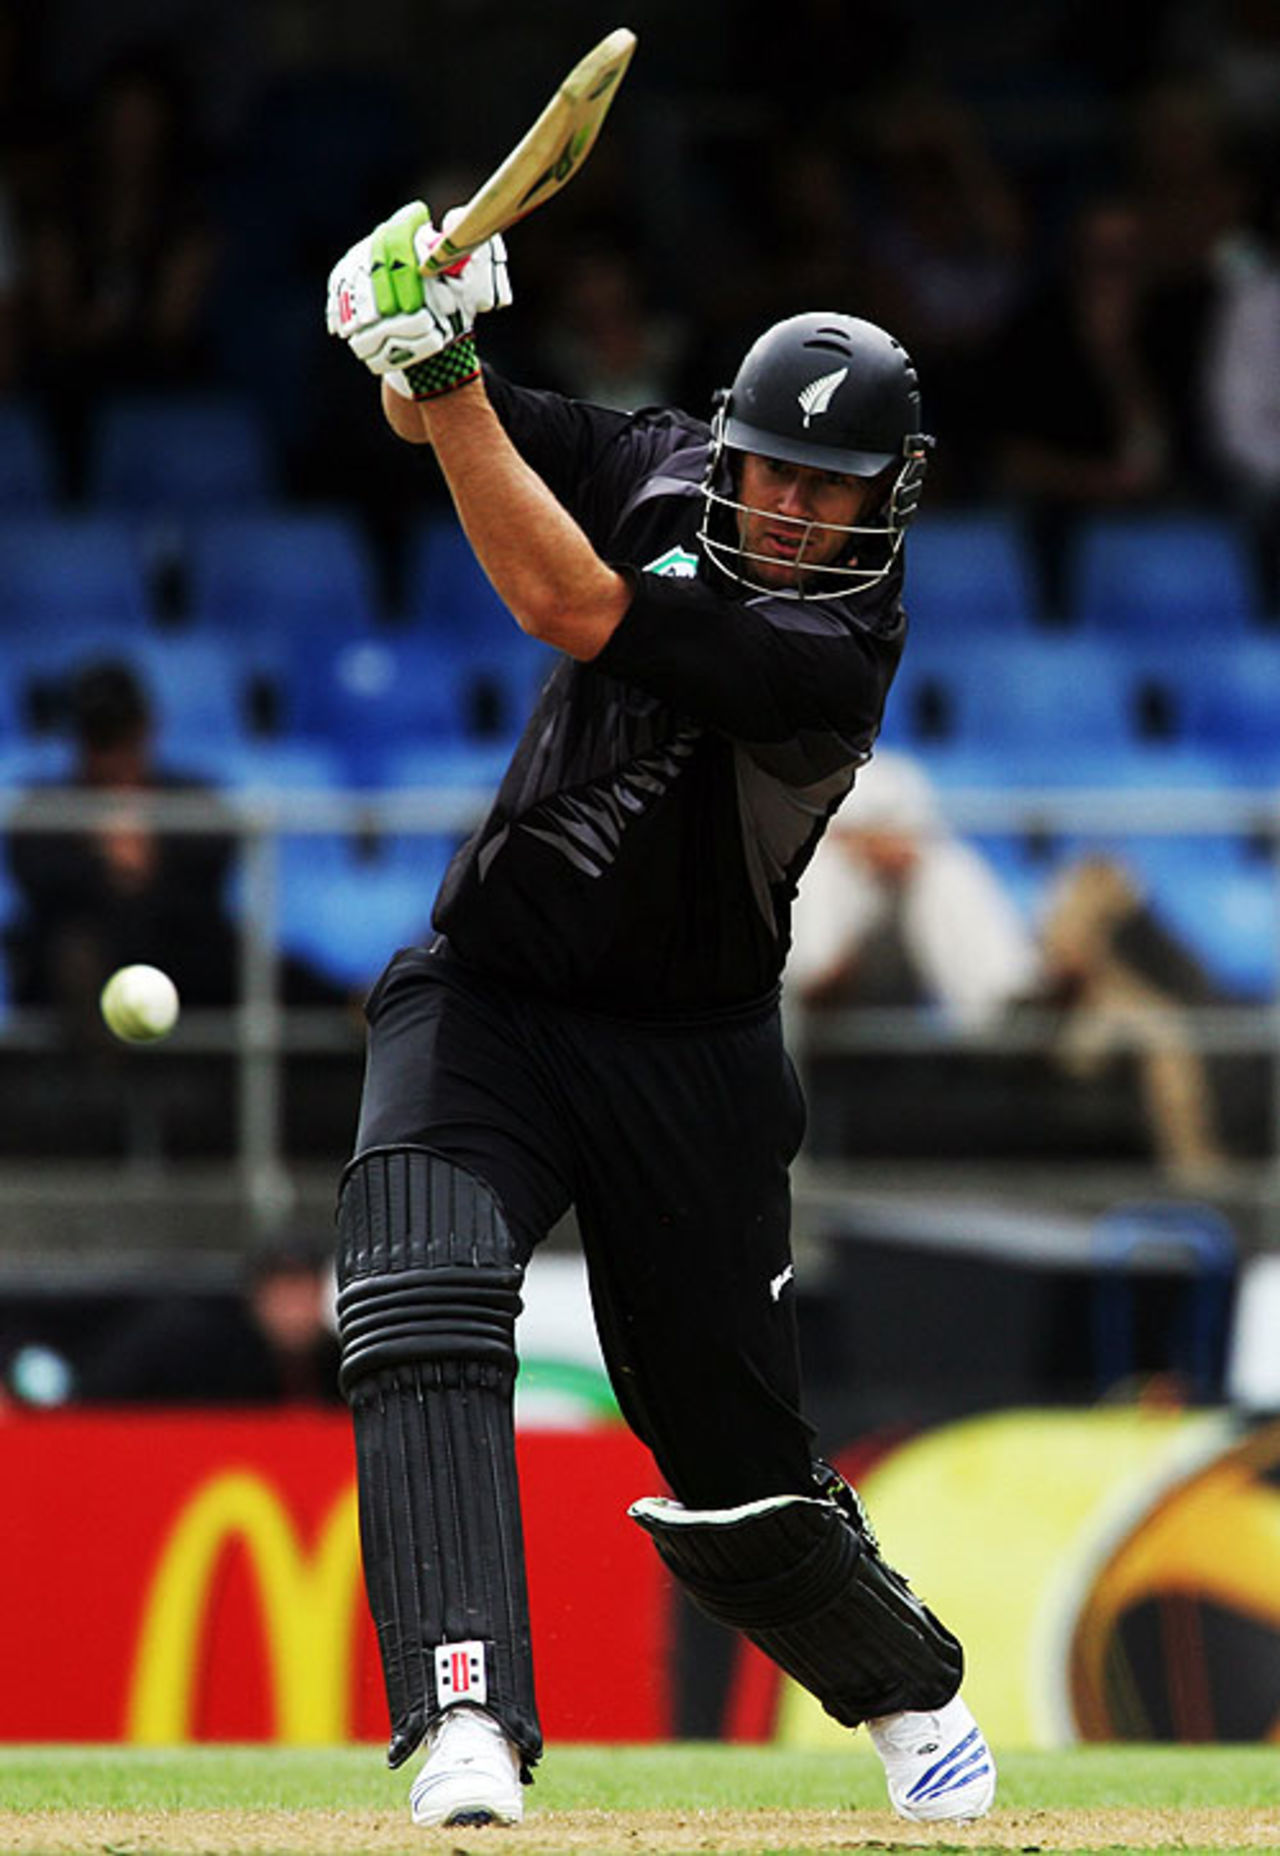 Jacob Oram drives through the covers during his innings of 88, including Peter Fulton for 4, New Zealand v England, 3rd ODI, Auckland, February 15, 2008